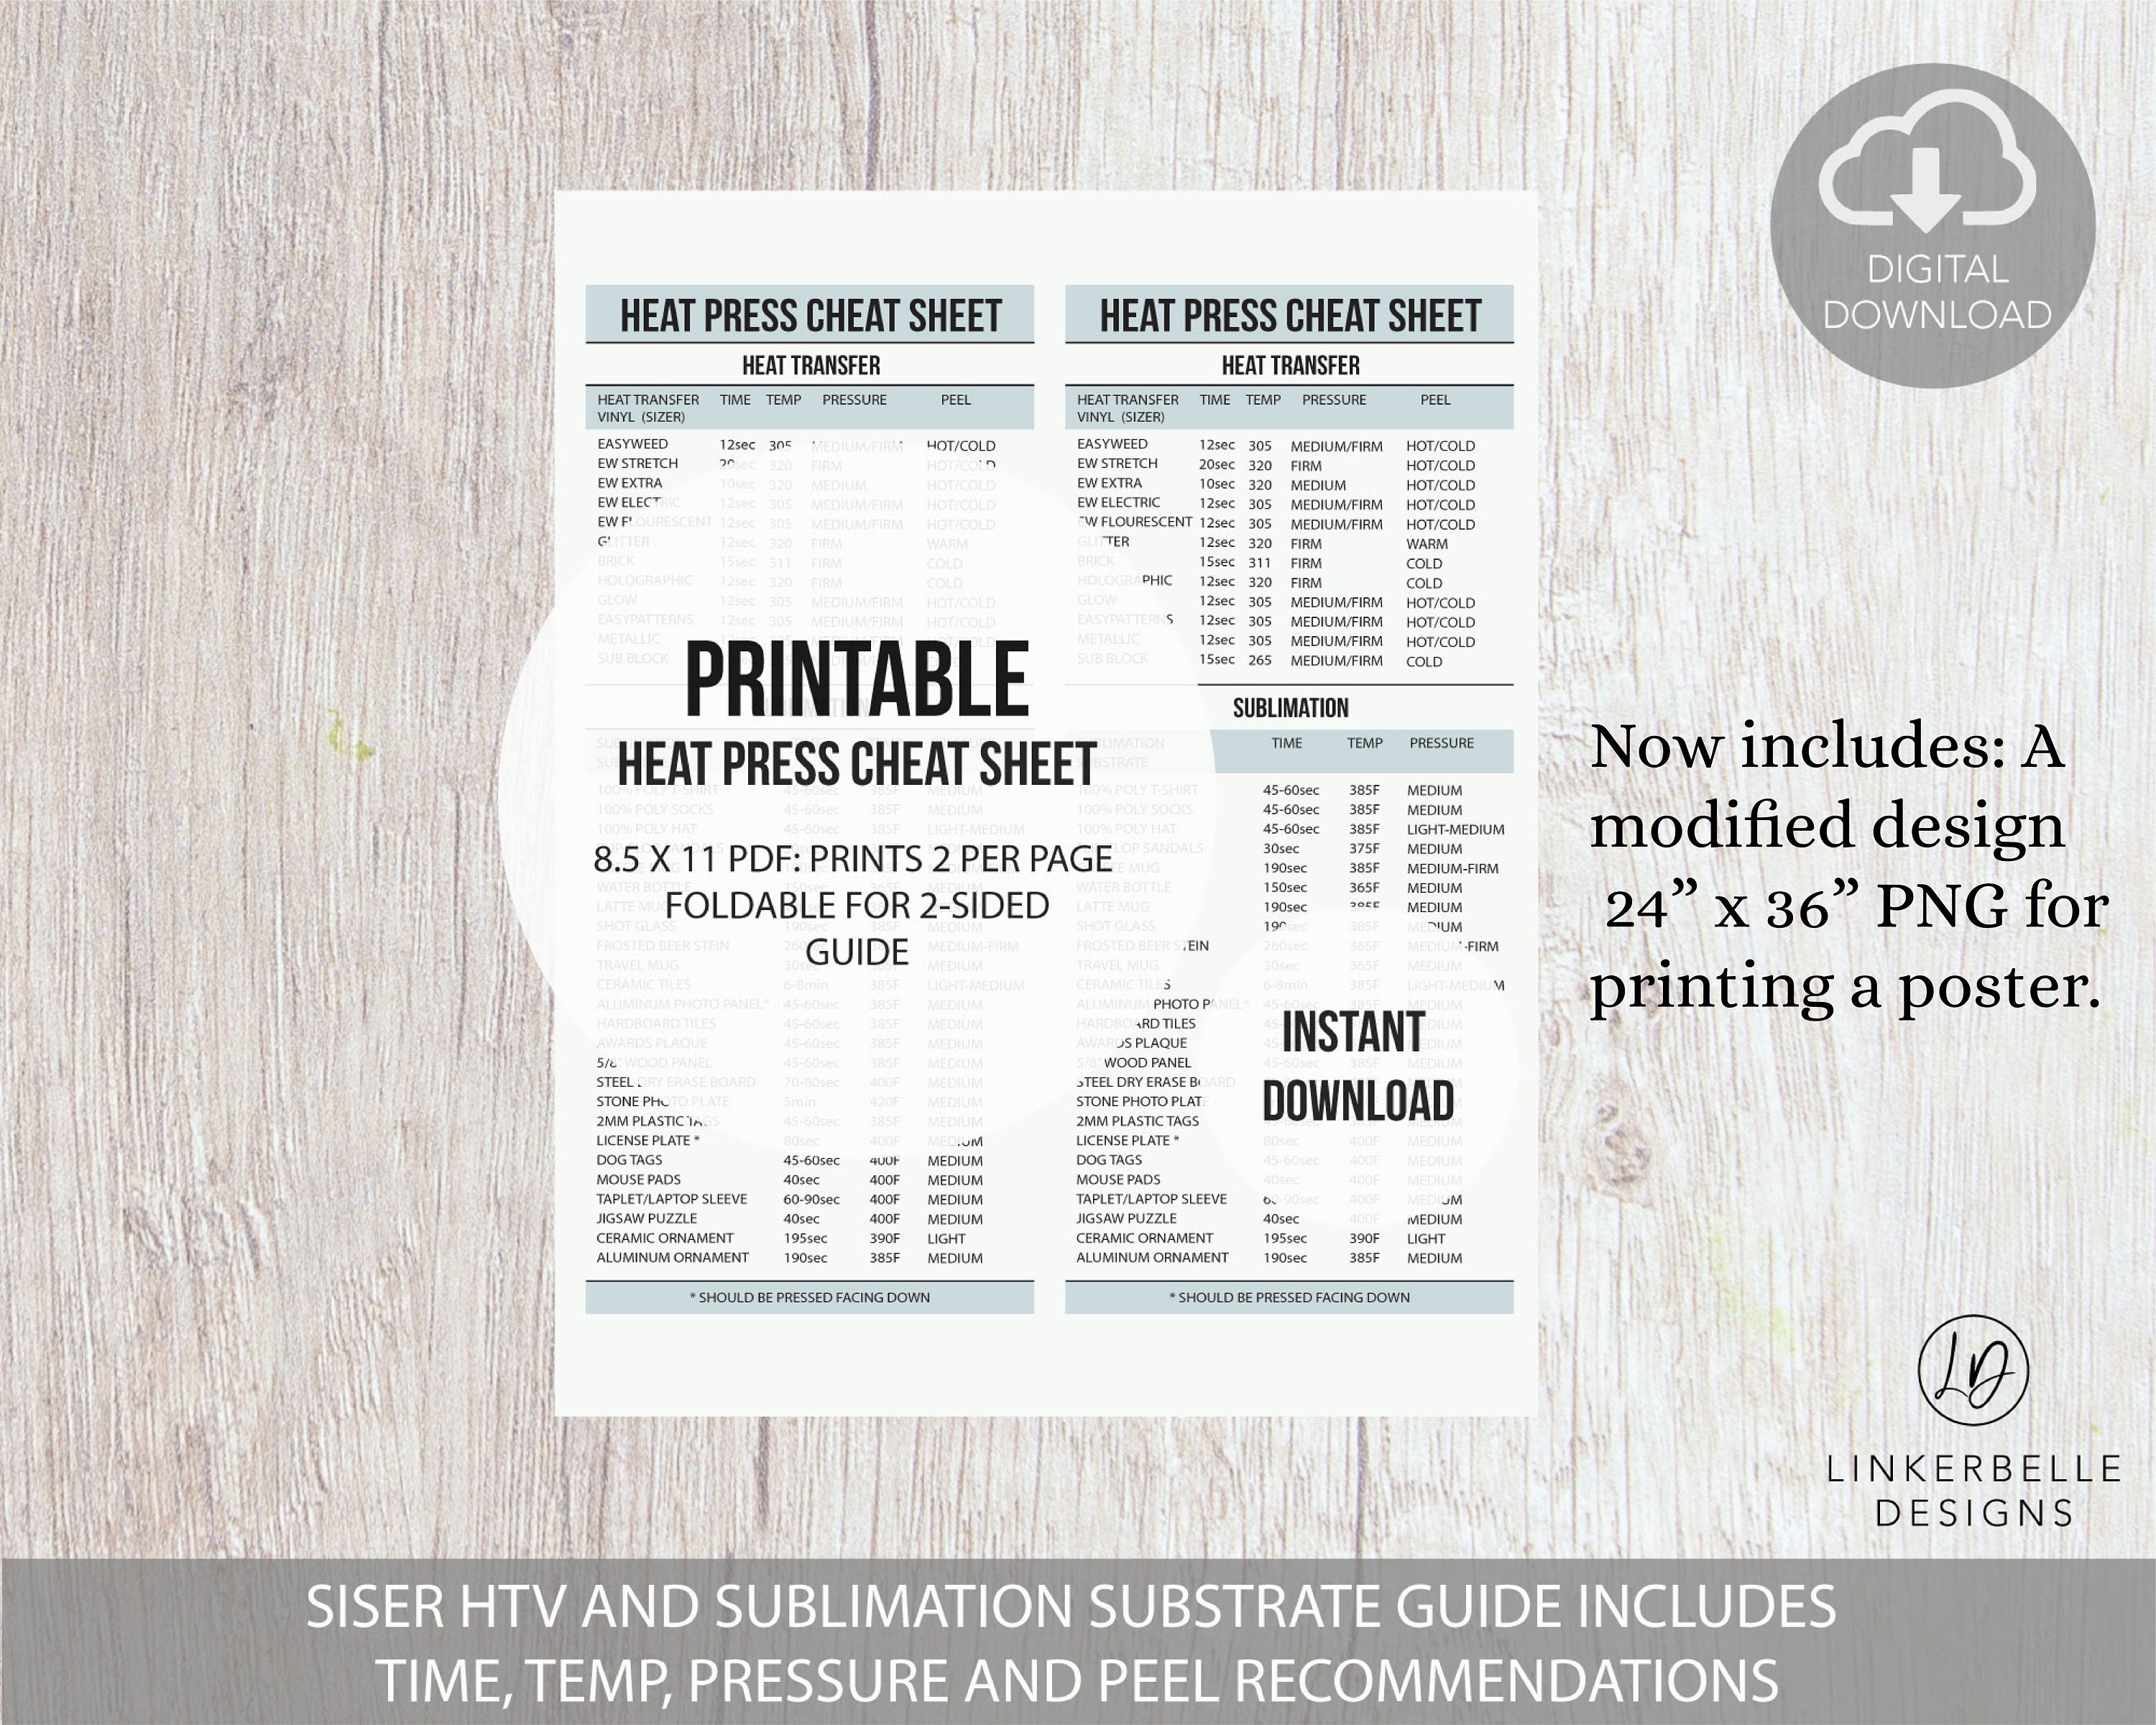 Printable Cheat Sheets for Cricut Blades and Tips Beginners Guide PDF  Instant Download 